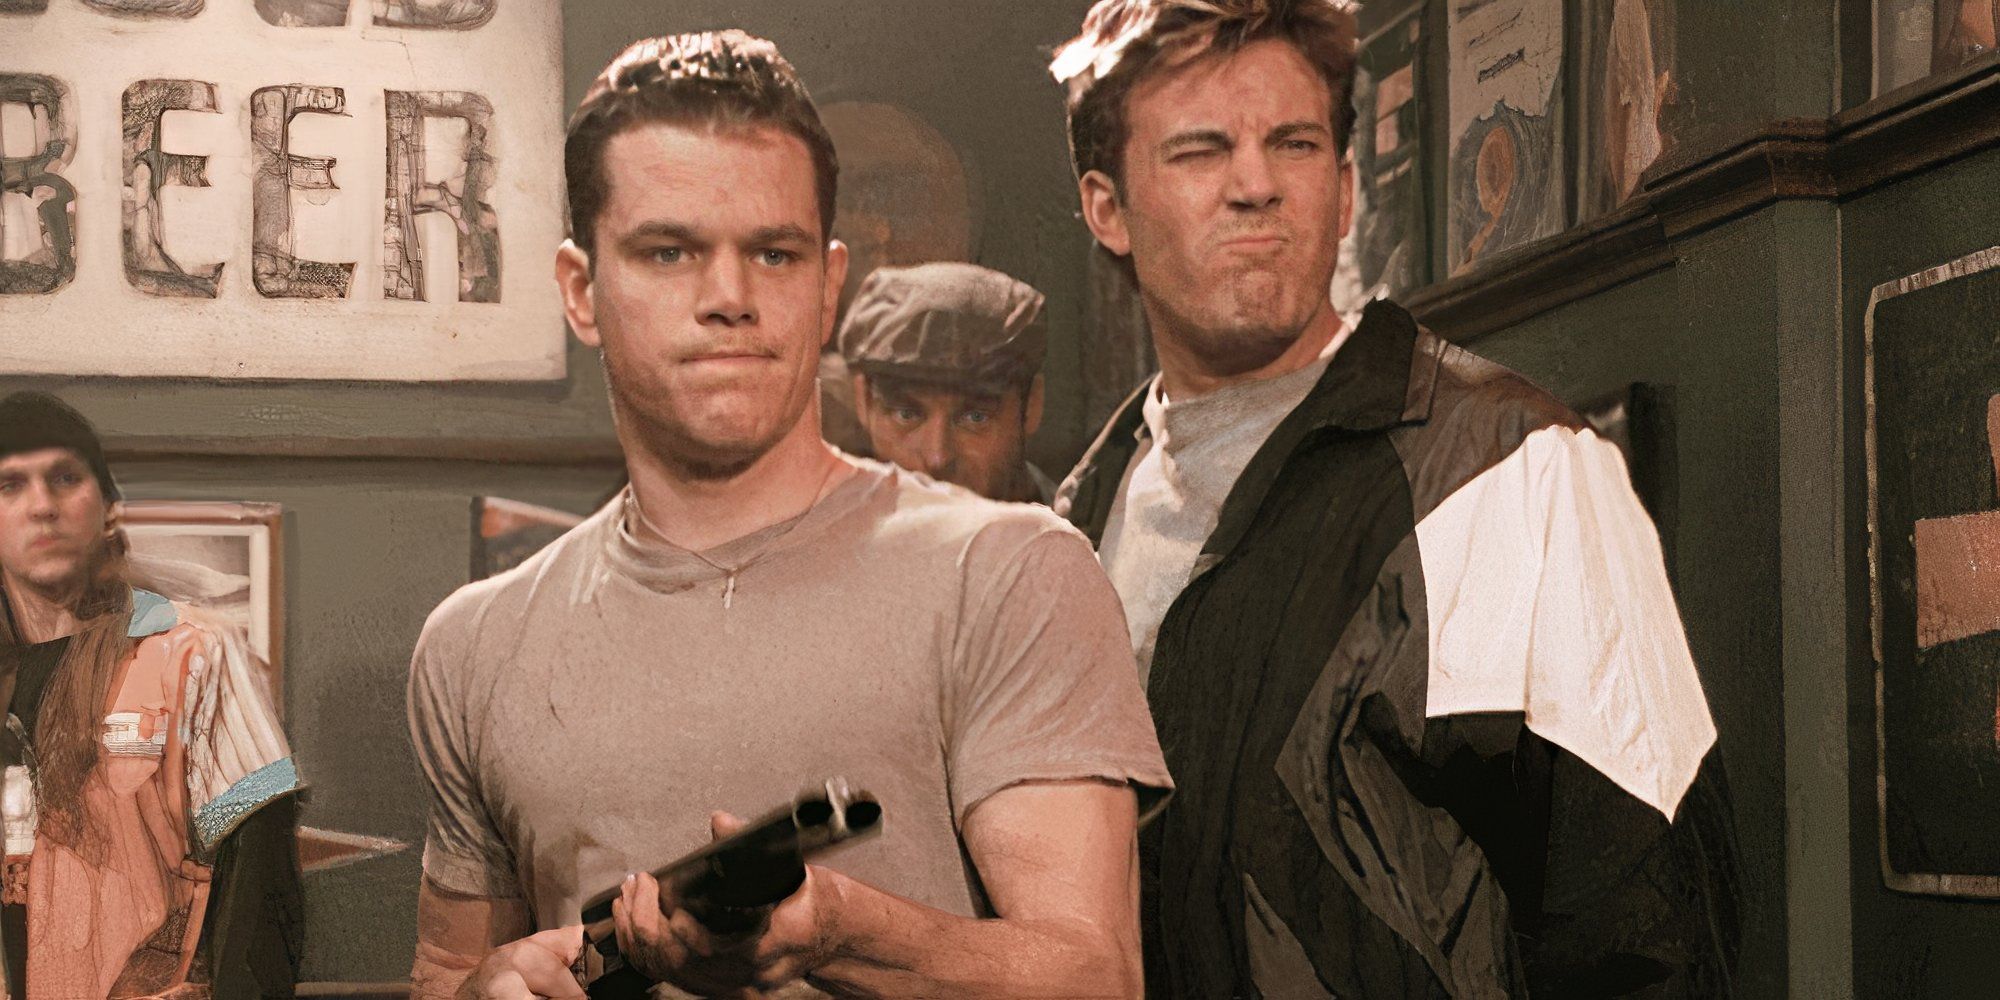 Matt Damon and Ben Affleck play the main roles in “Good Will Hunting 2”